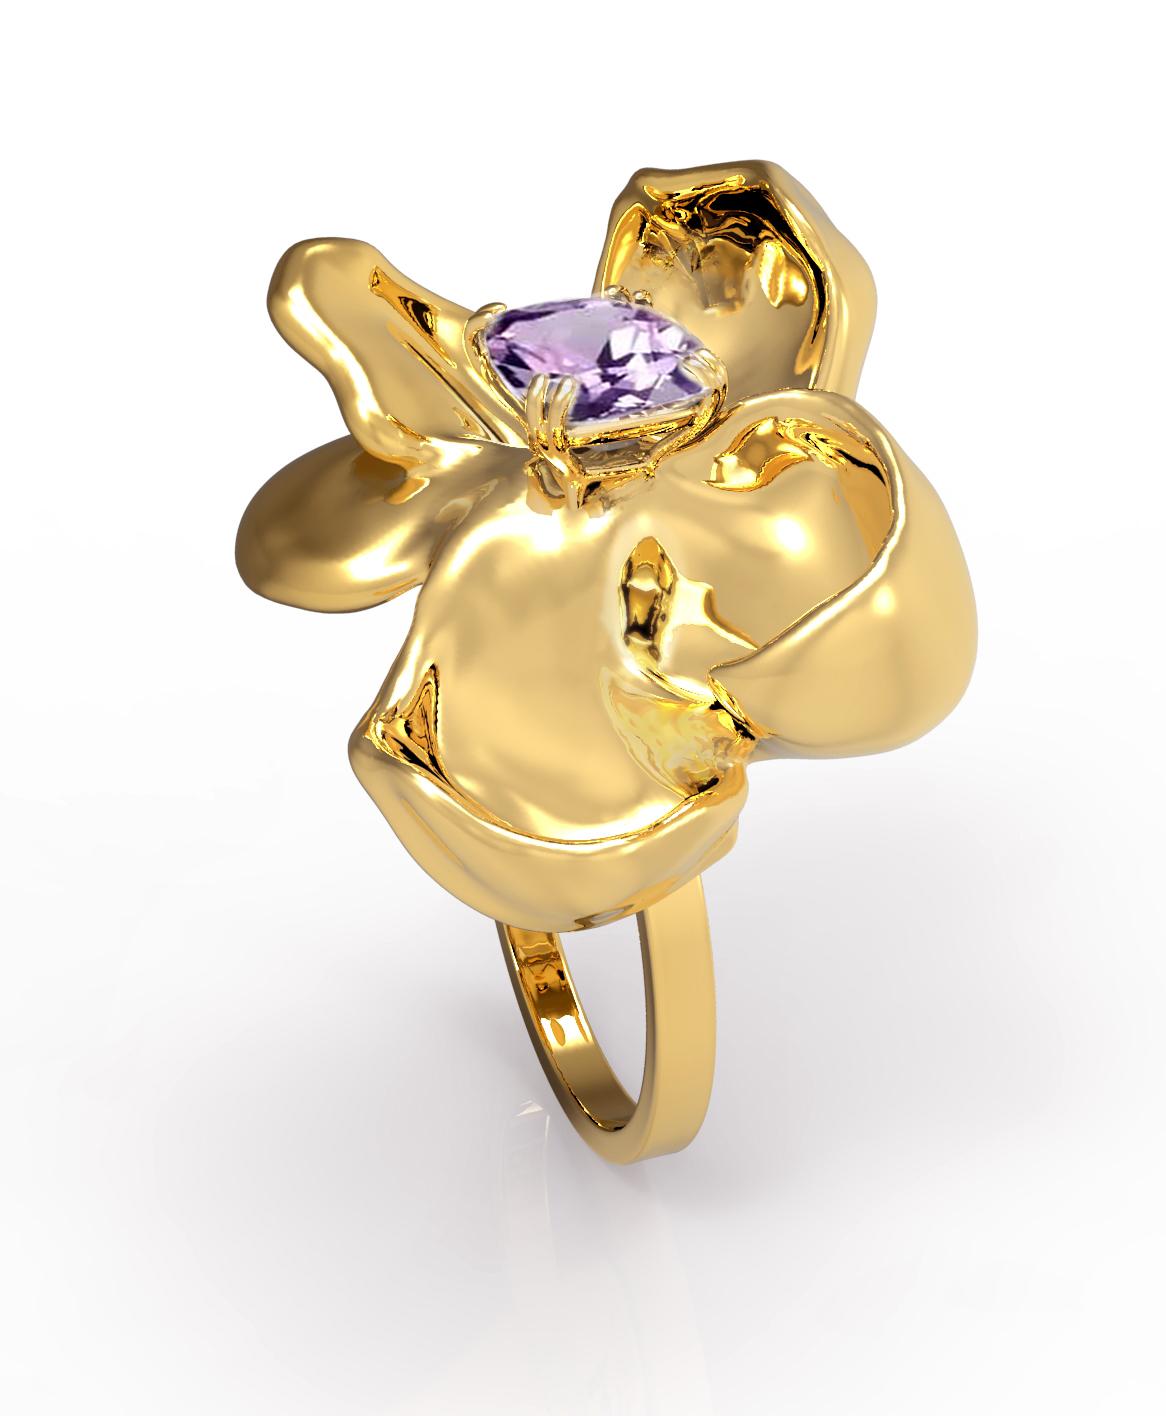 This Magnolia Flower engagement ring is crafted from 18 karat yellow gold with an amethyst stone. It was designed by the oil painter and 3D jewelry designer, Polya Medvedeva.

The ring is not just limited to special occasions; it can also be worn as